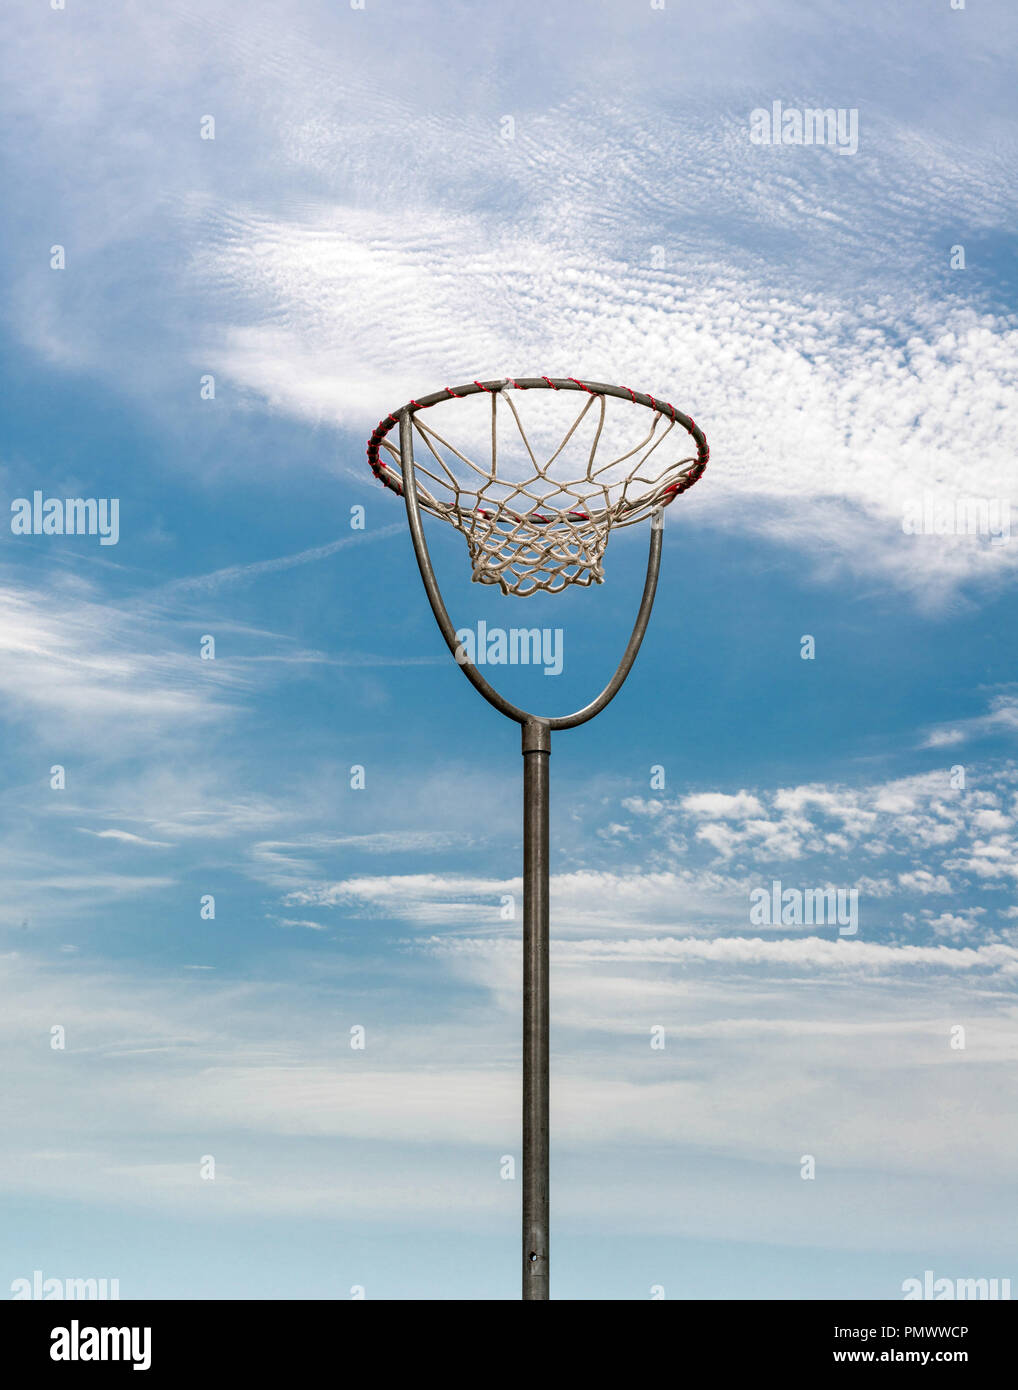 The basket of netball seen in the sky. Stock Photo